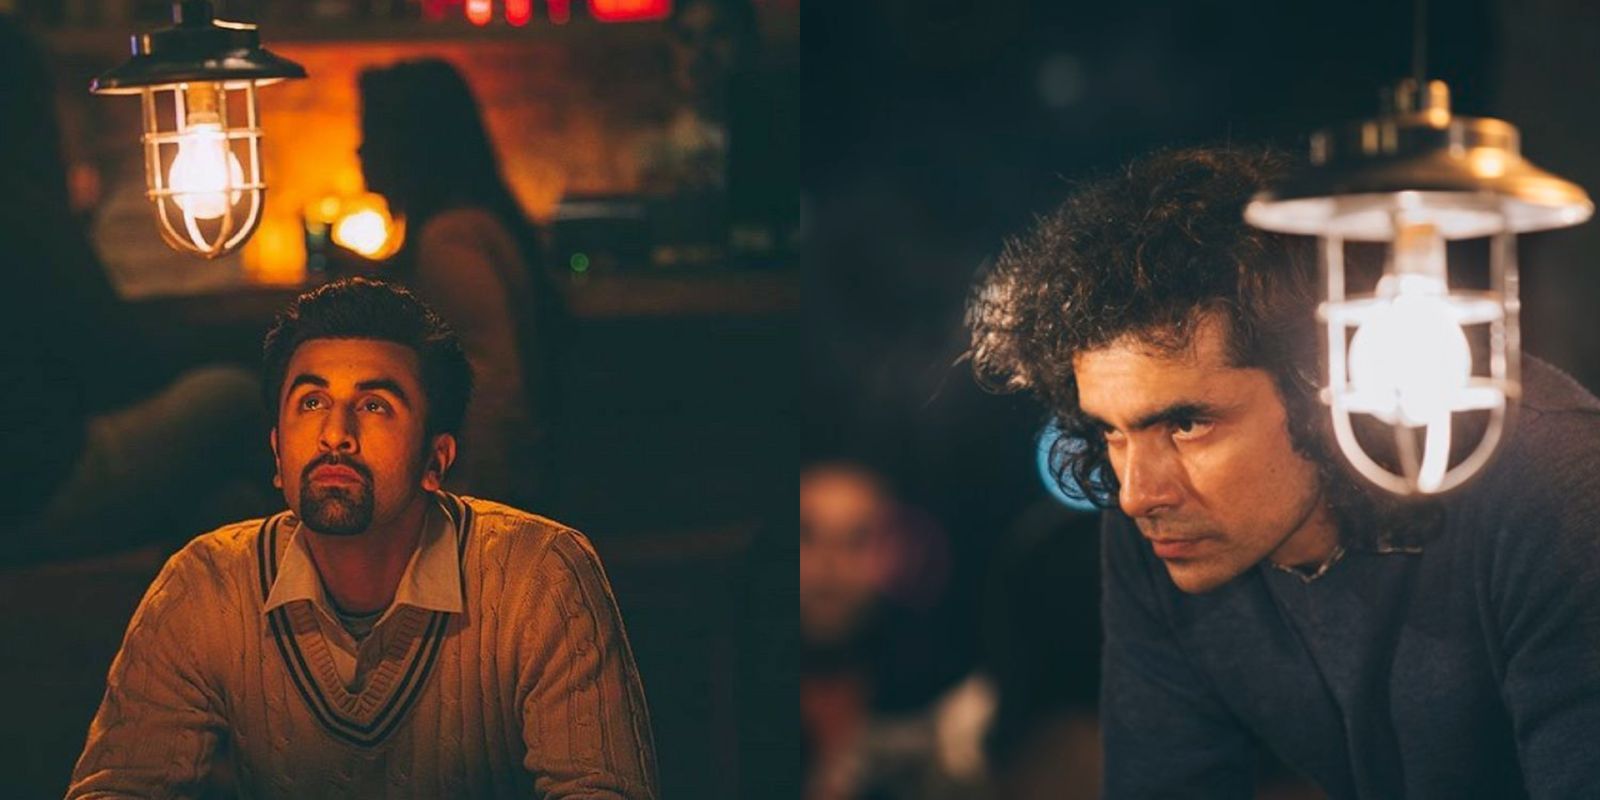 Imtiaz Ali Reveals How Ranbir-Deepika Starrer Tamasha Was Born Out Of His Own Experience, Says, "That Boy Is In A Way Me"